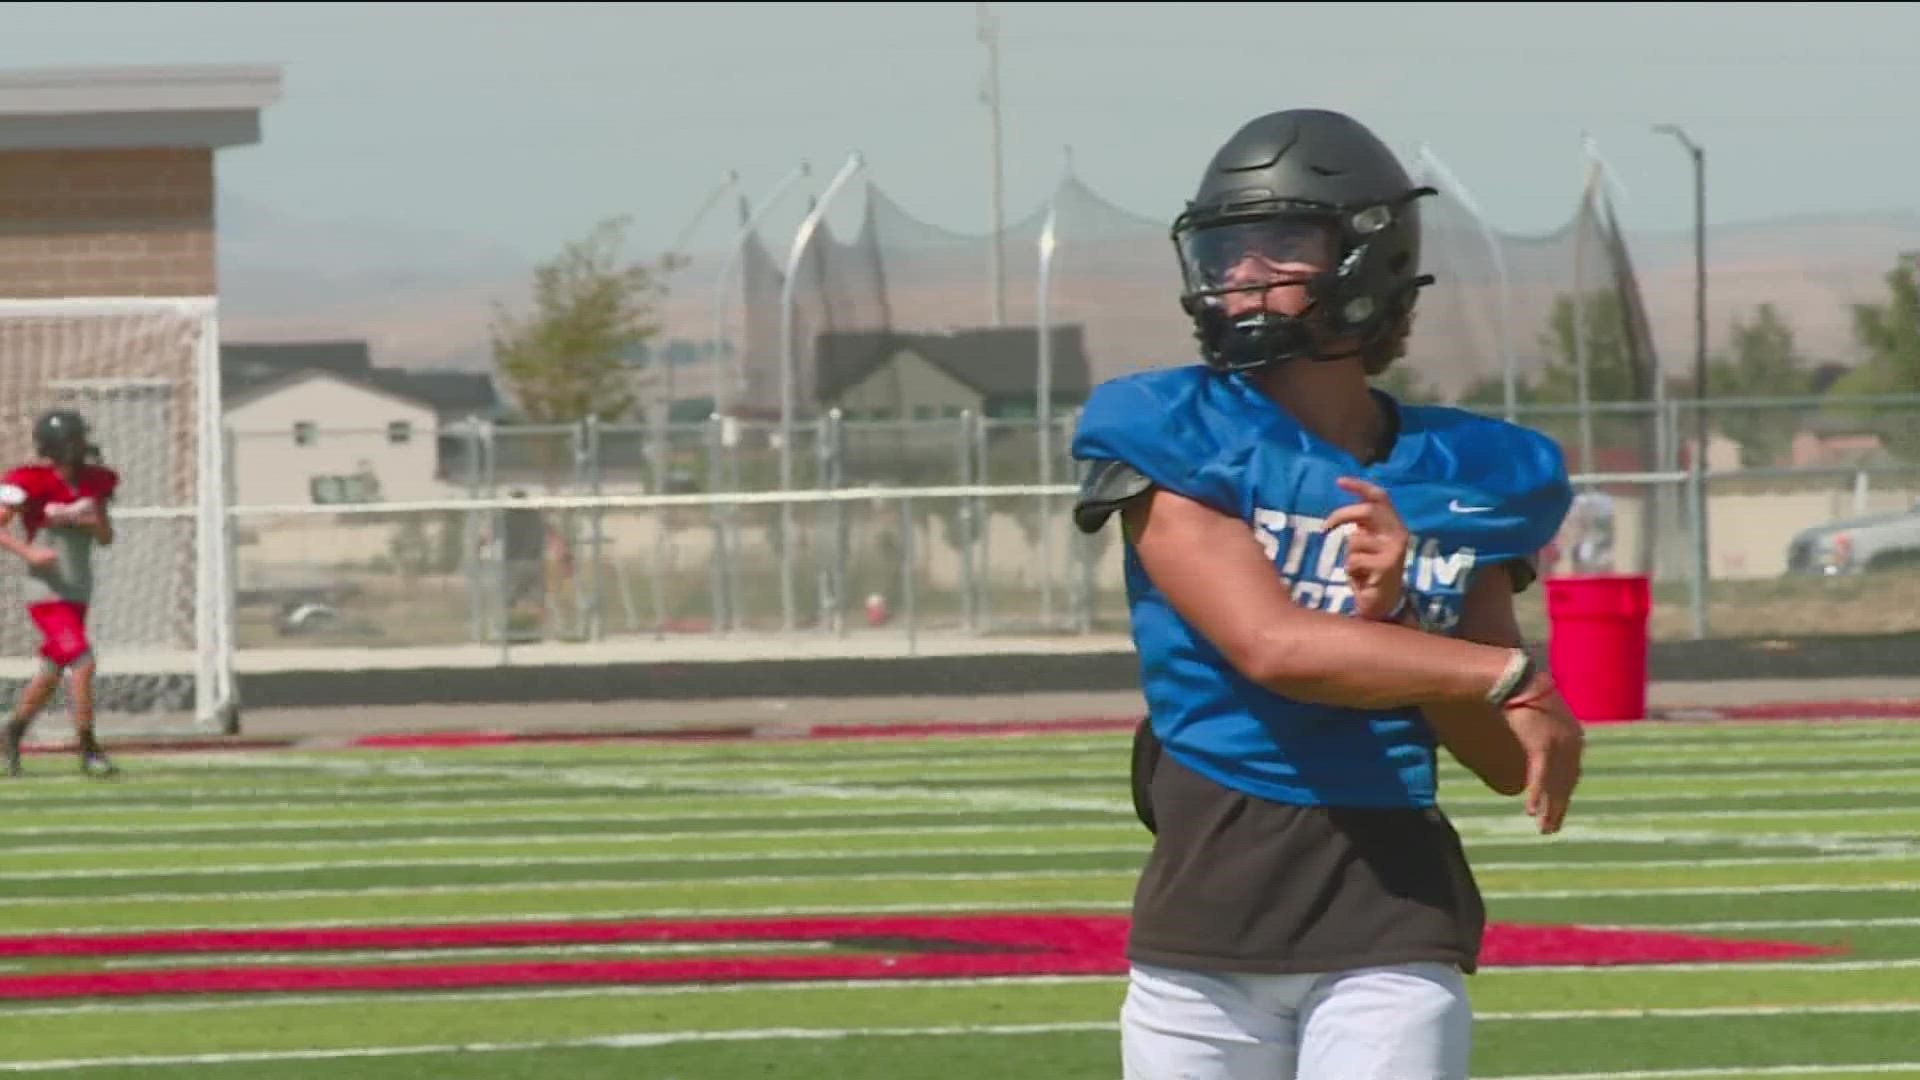 Coming off a 1-8 season, the Owyhee Storm may be flying under the radar. However, the team has made huge strides in building an identity before year two.